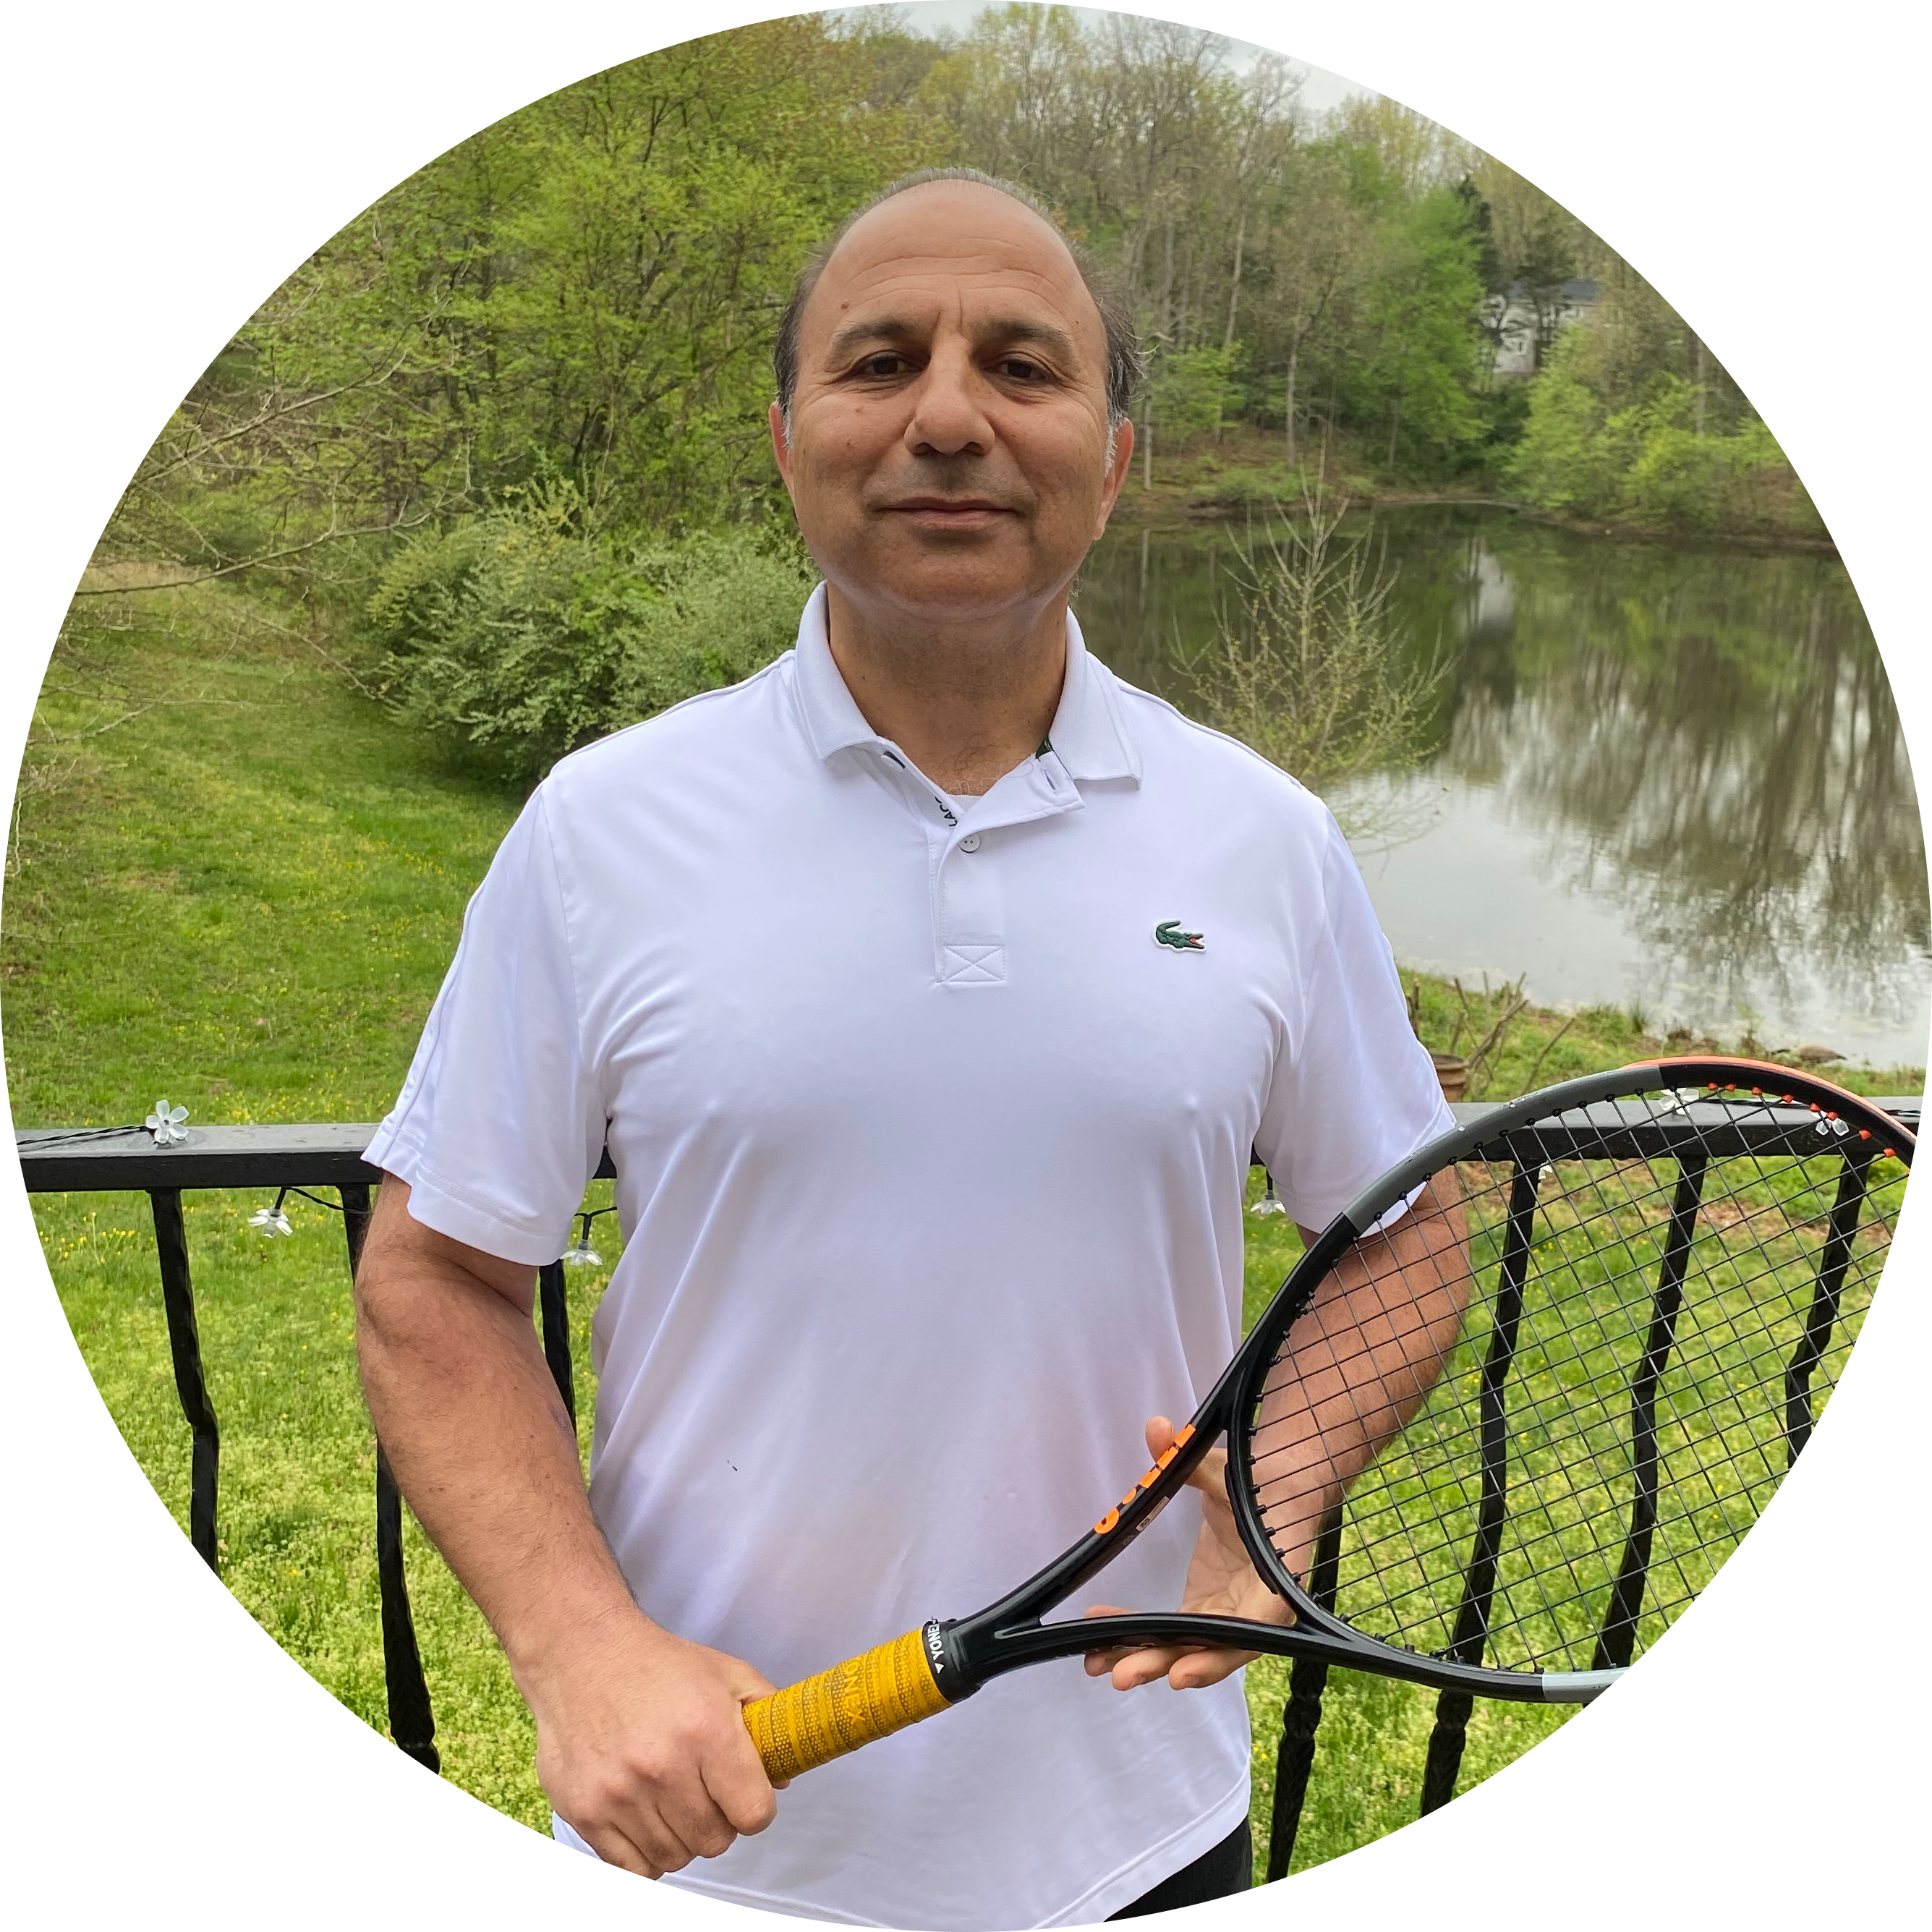 Wali S. teaches tennis lessons in Sterling, VA